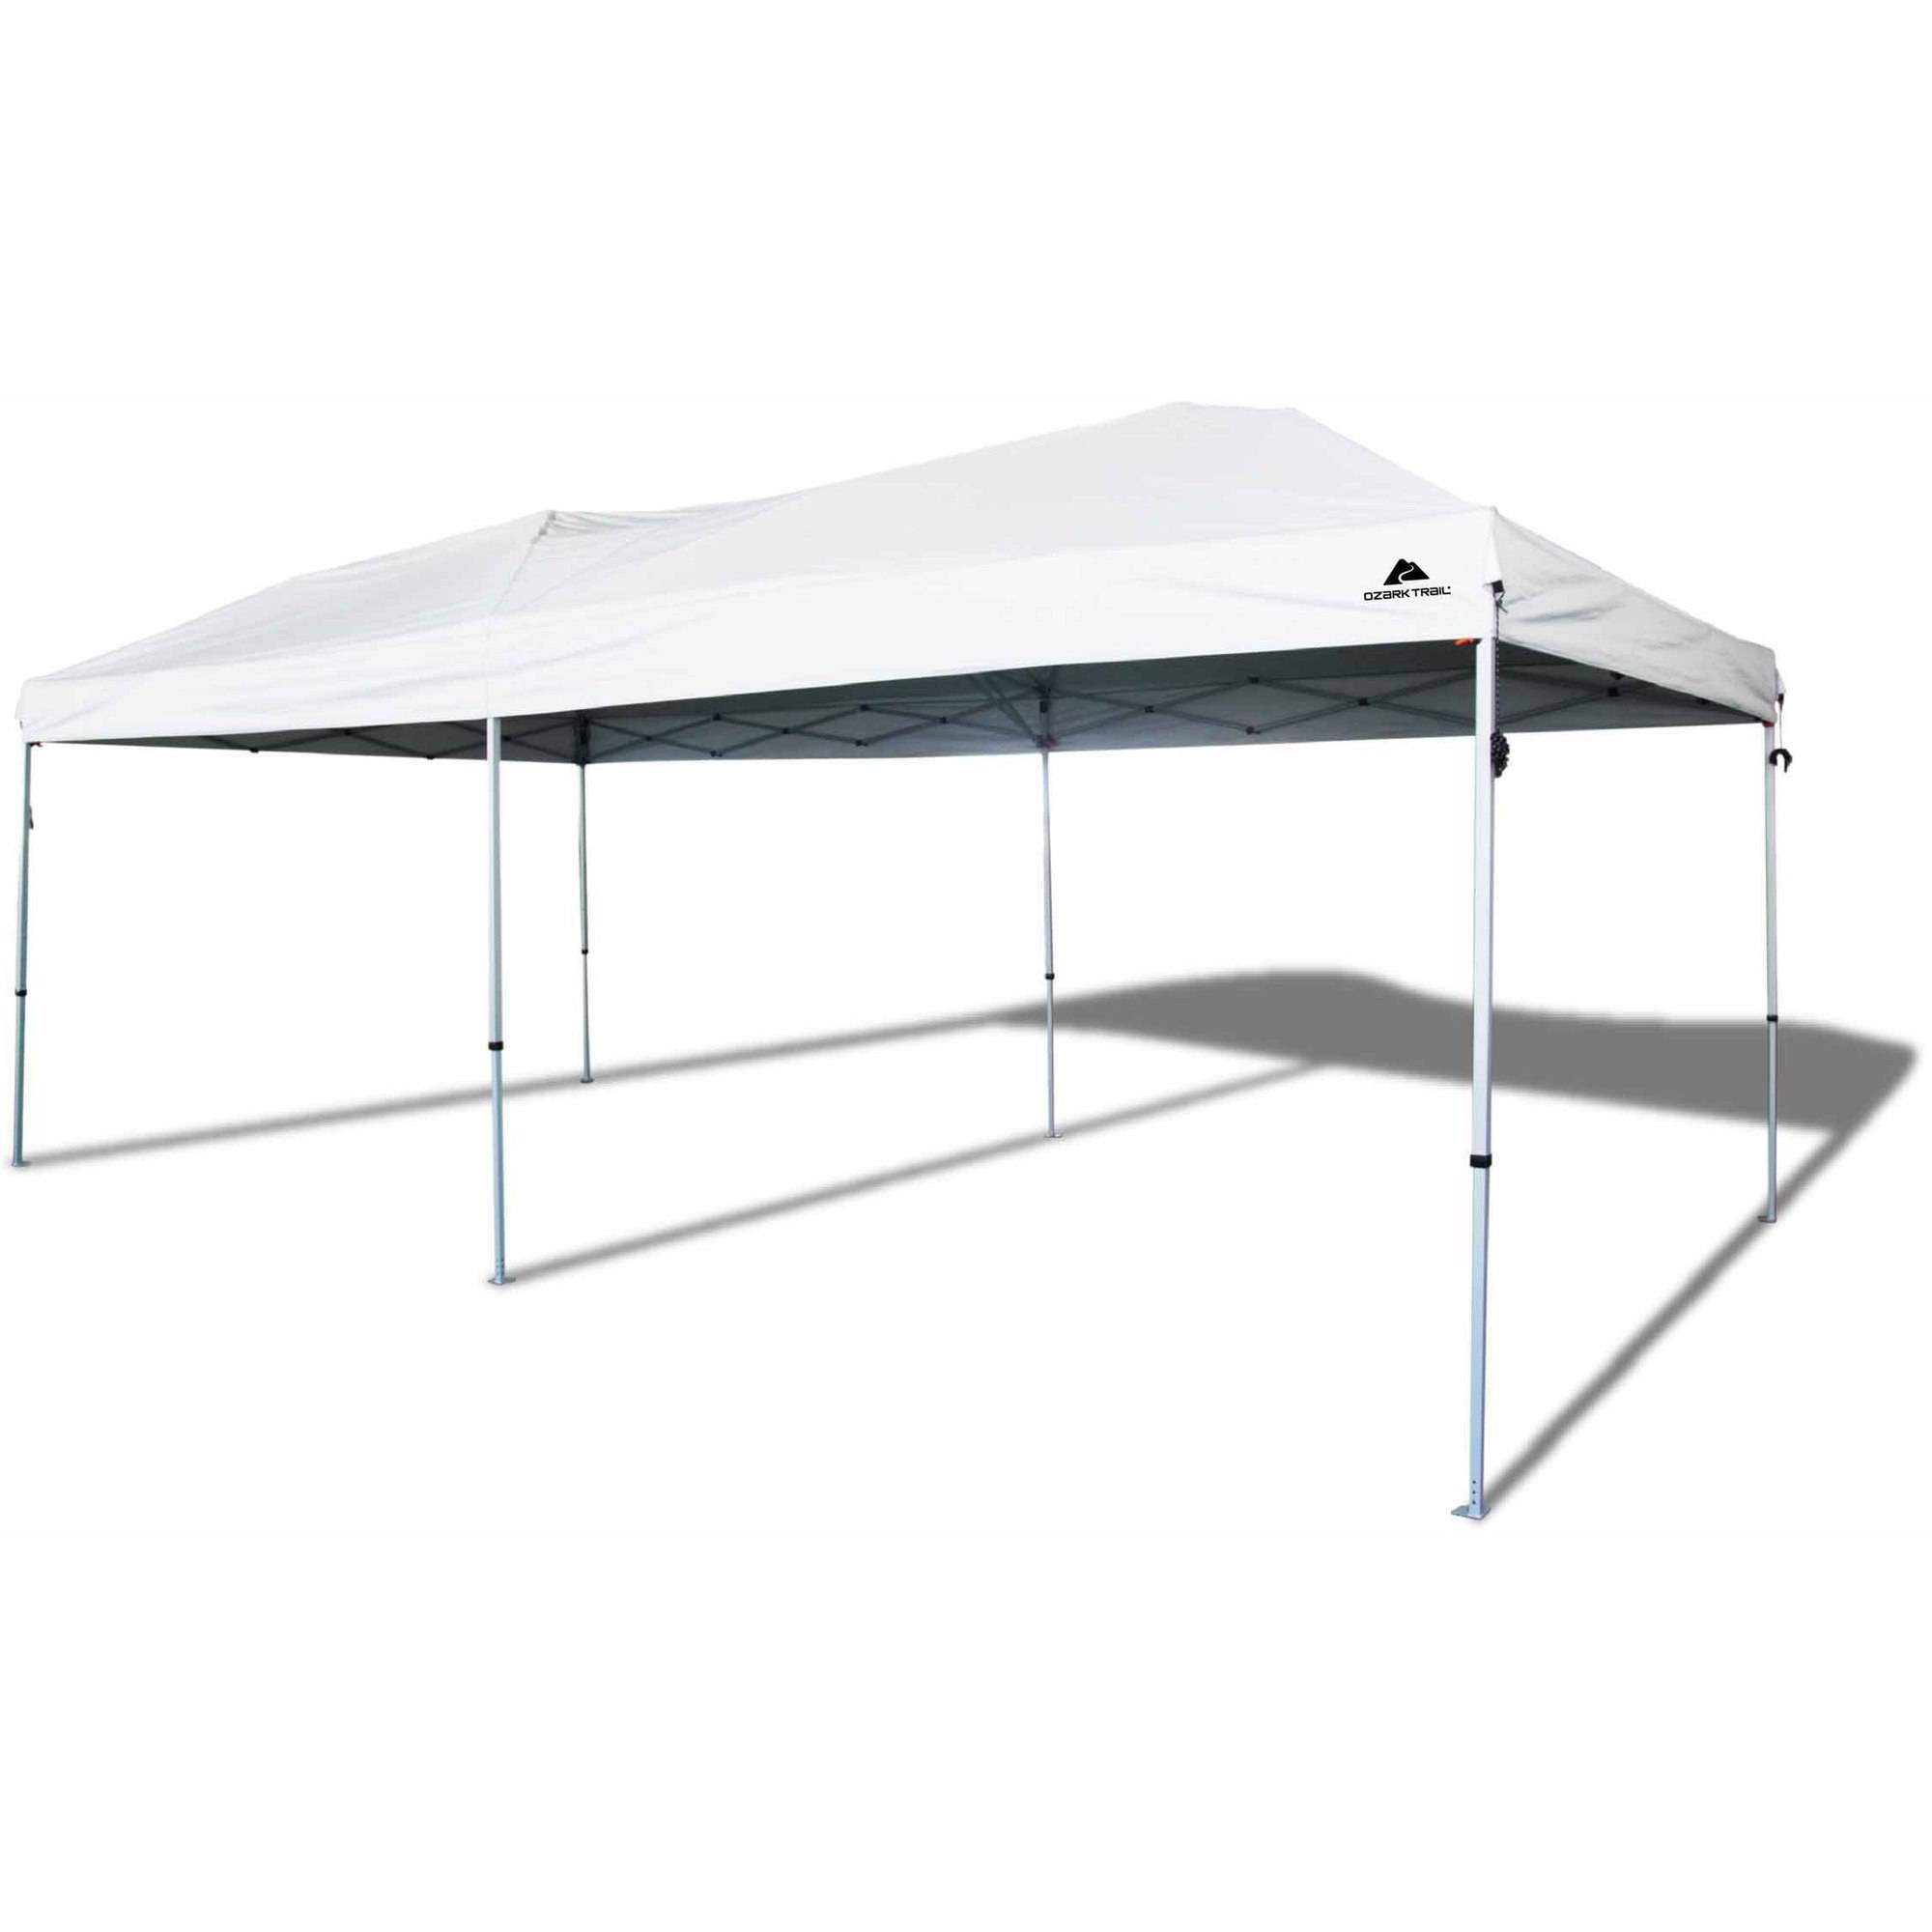 Ozark Trail 20' x 10' Straight Leg Outdoor Easy Pop-up Canopy, White - image 1 of 10